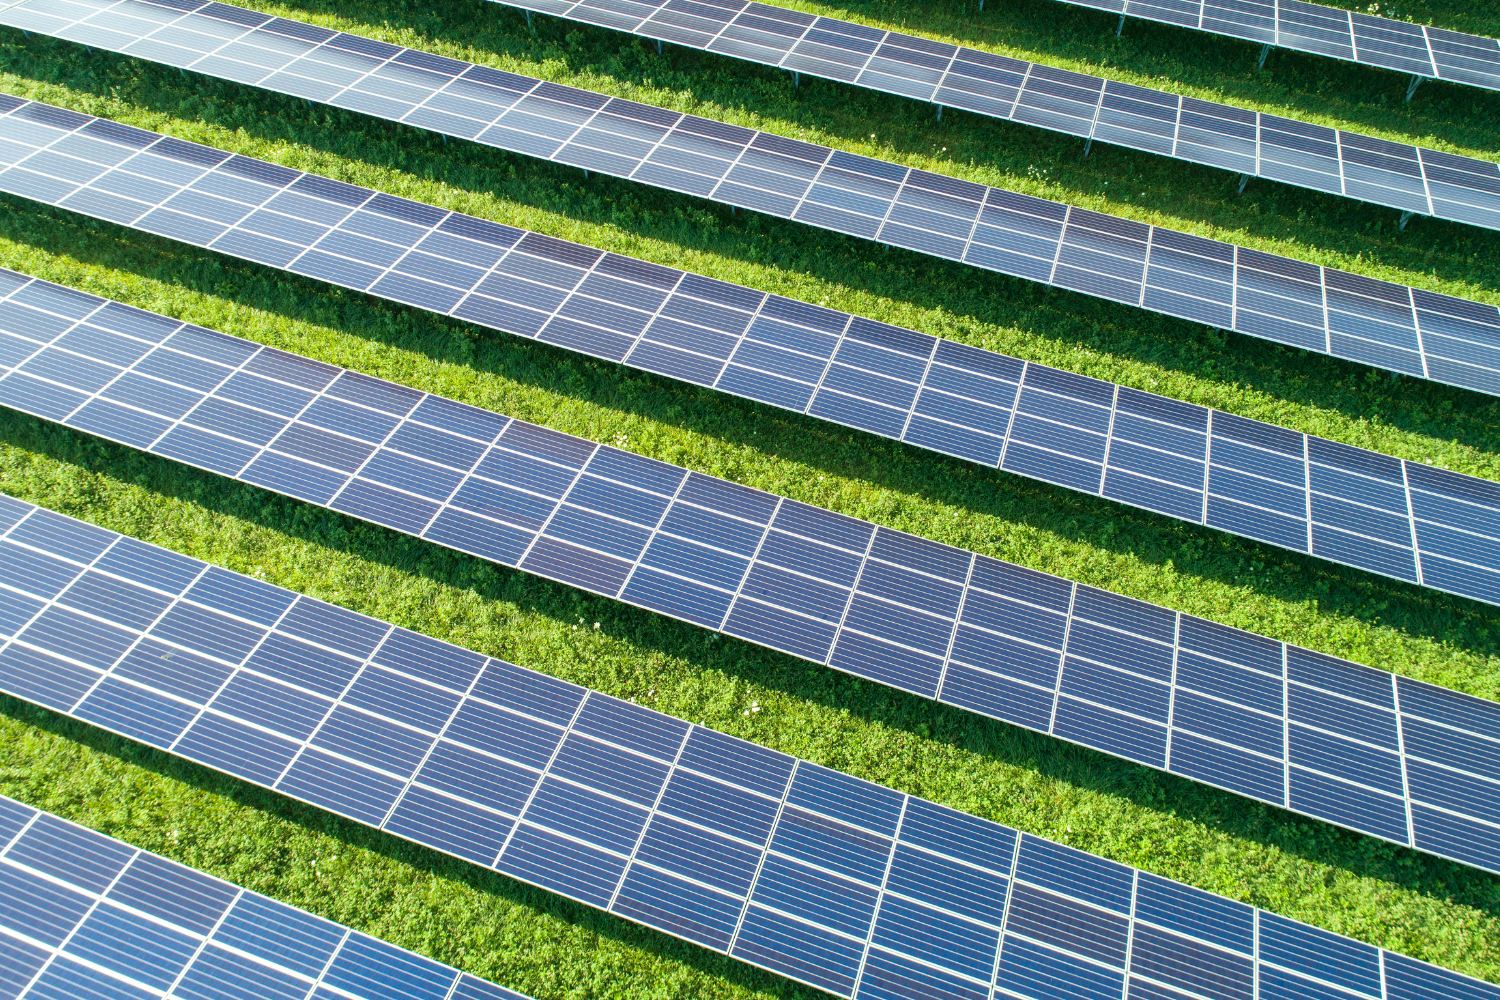 Aerial view of solar panels in a field.